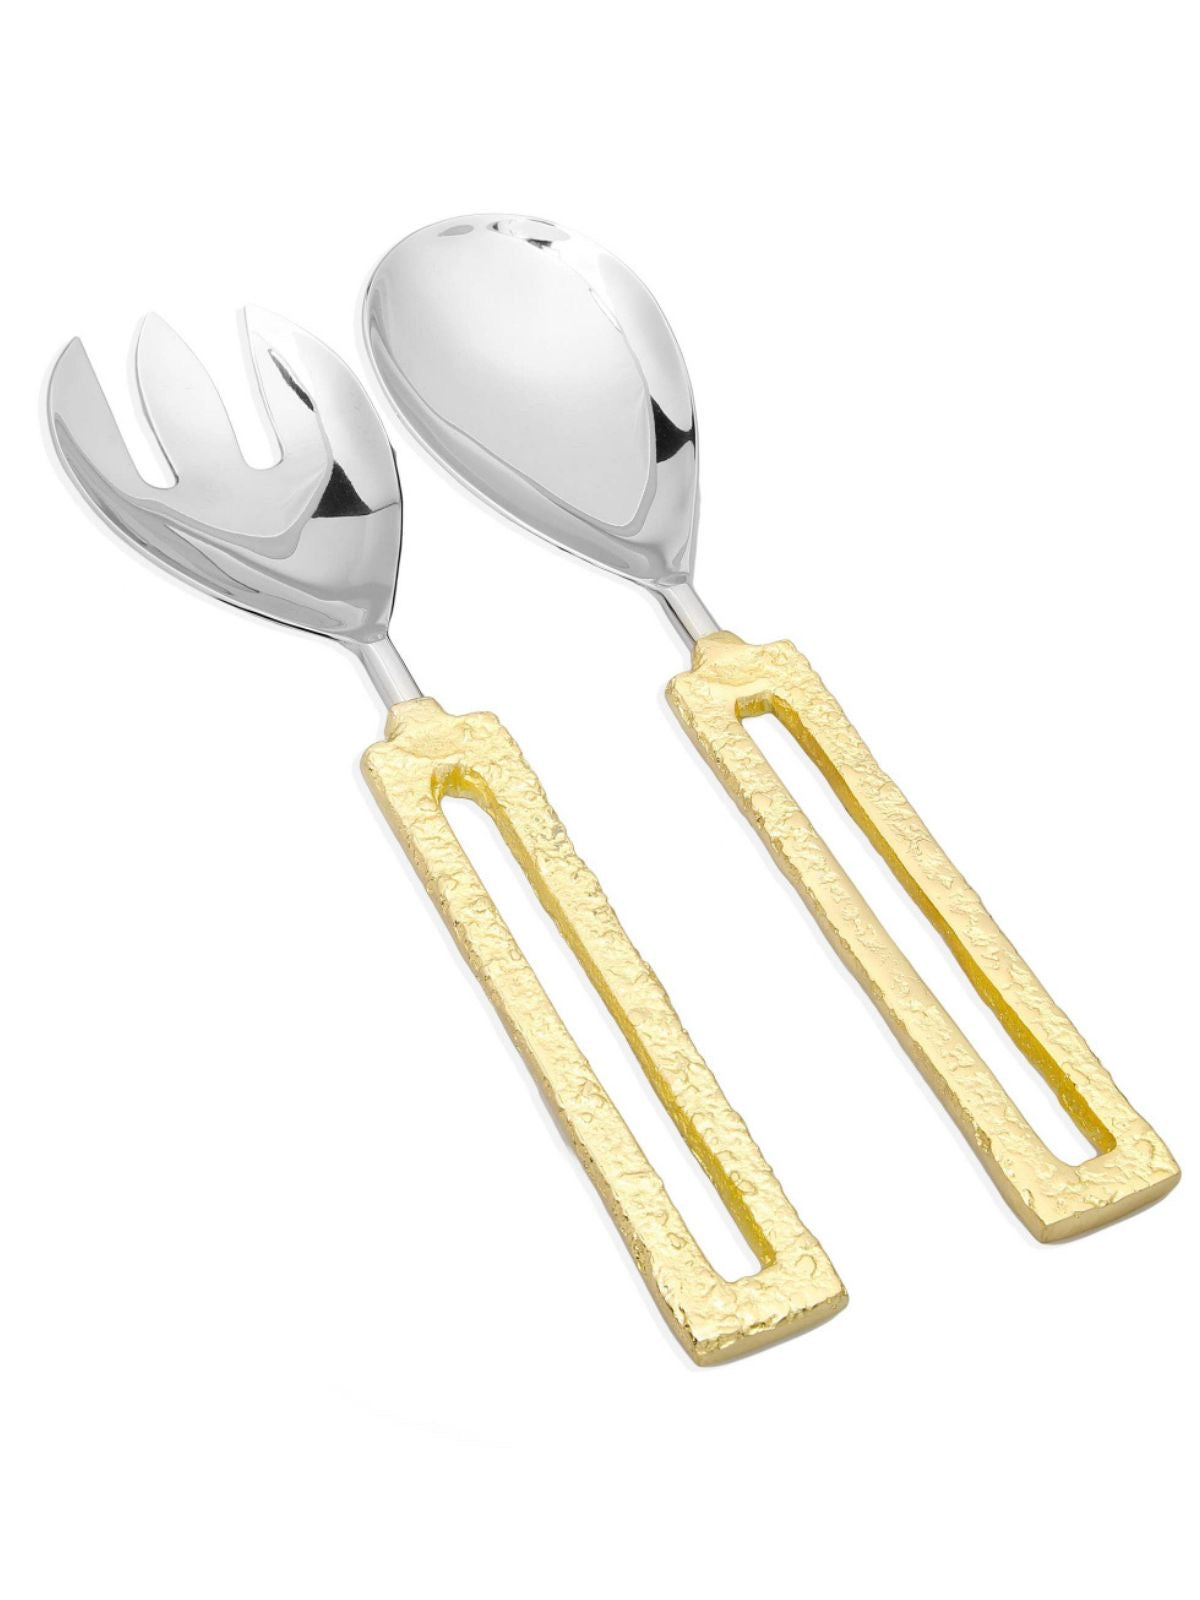 Add some texture to your serving decor with this elegant hand-crafted stainless steel salad server set featuring two-toned colors and a square loop handle that is adorned with a slight hammered design. Available at KYA Home Decor